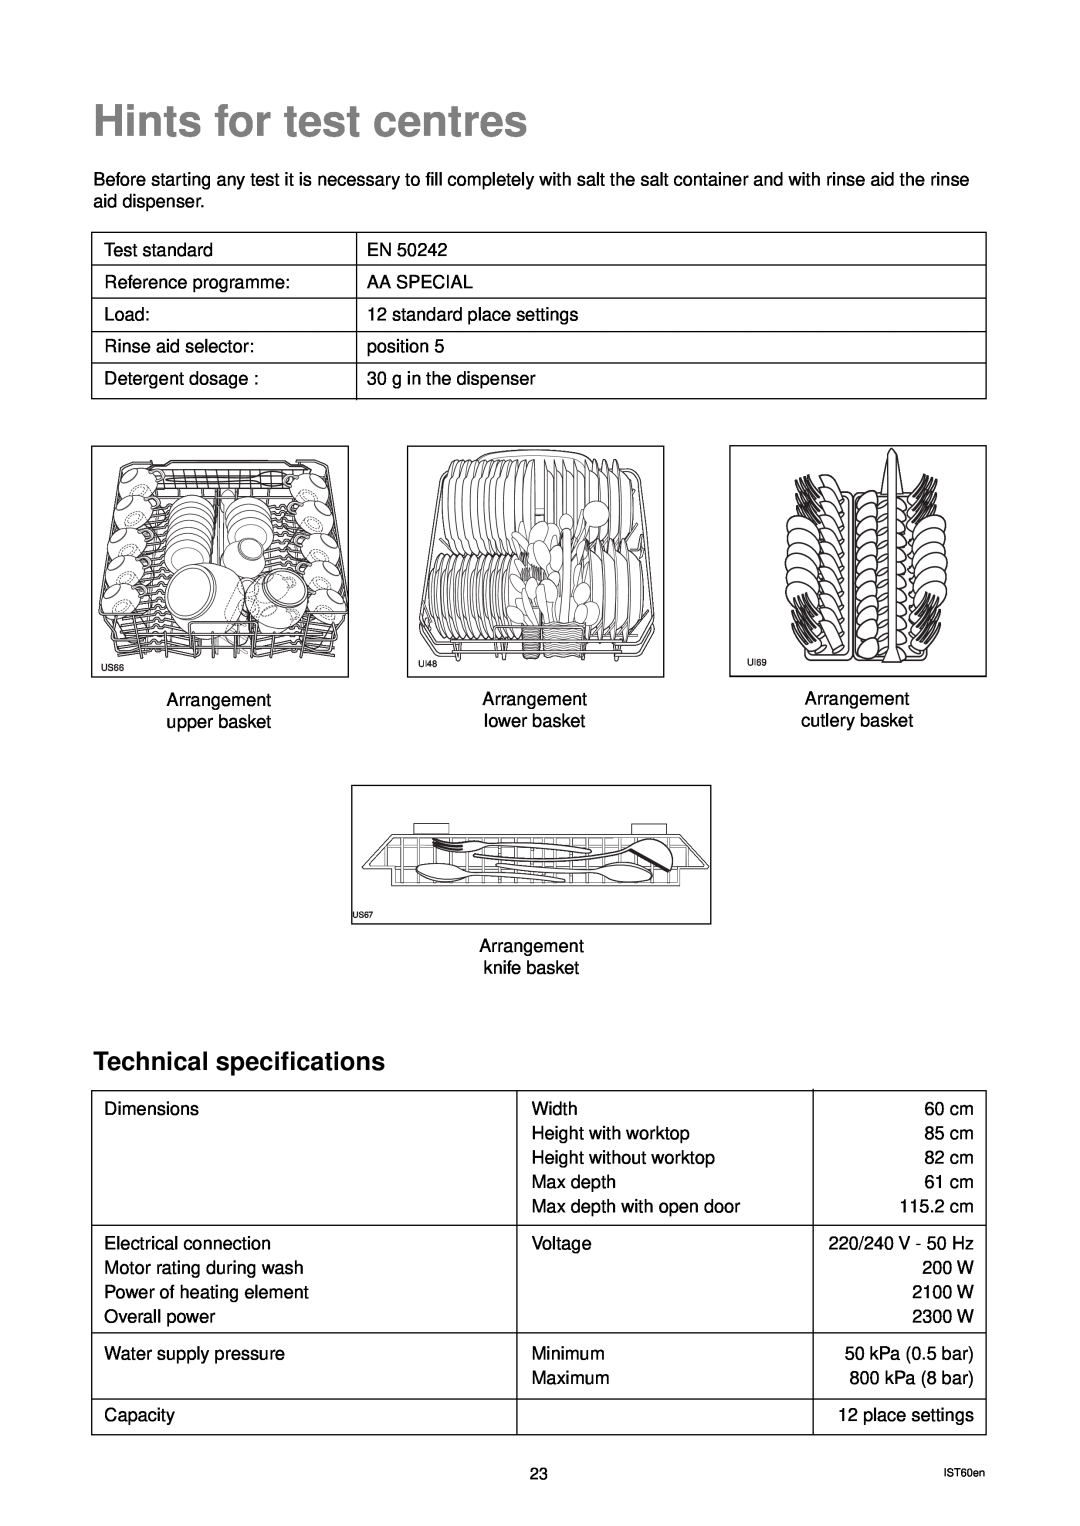 Zanussi DES 959 manual Hints for test centres, Technical specifications 